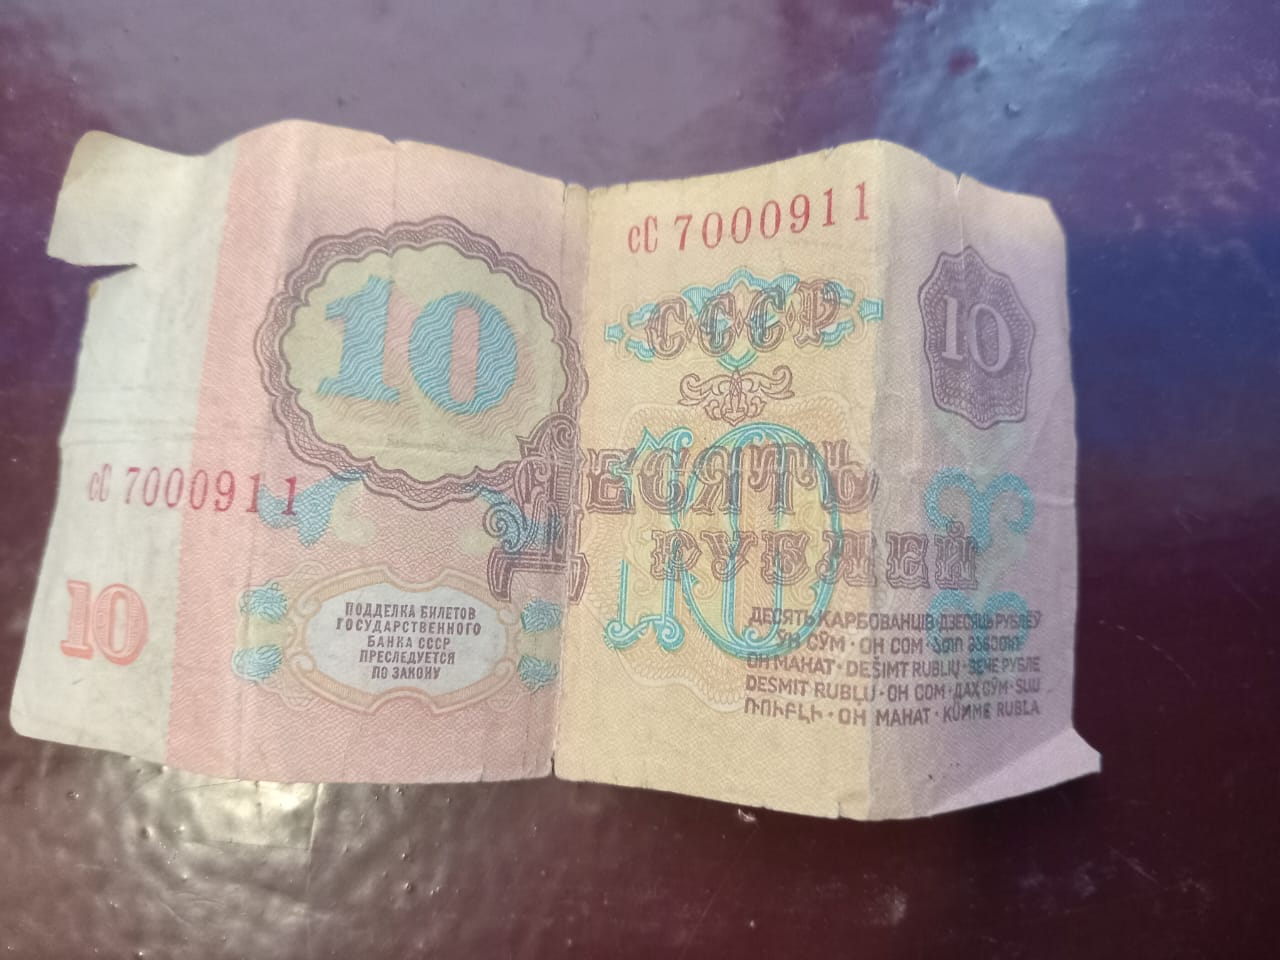 old, creased pink bill that reads '10 rubles, USSR' on it in Russian 